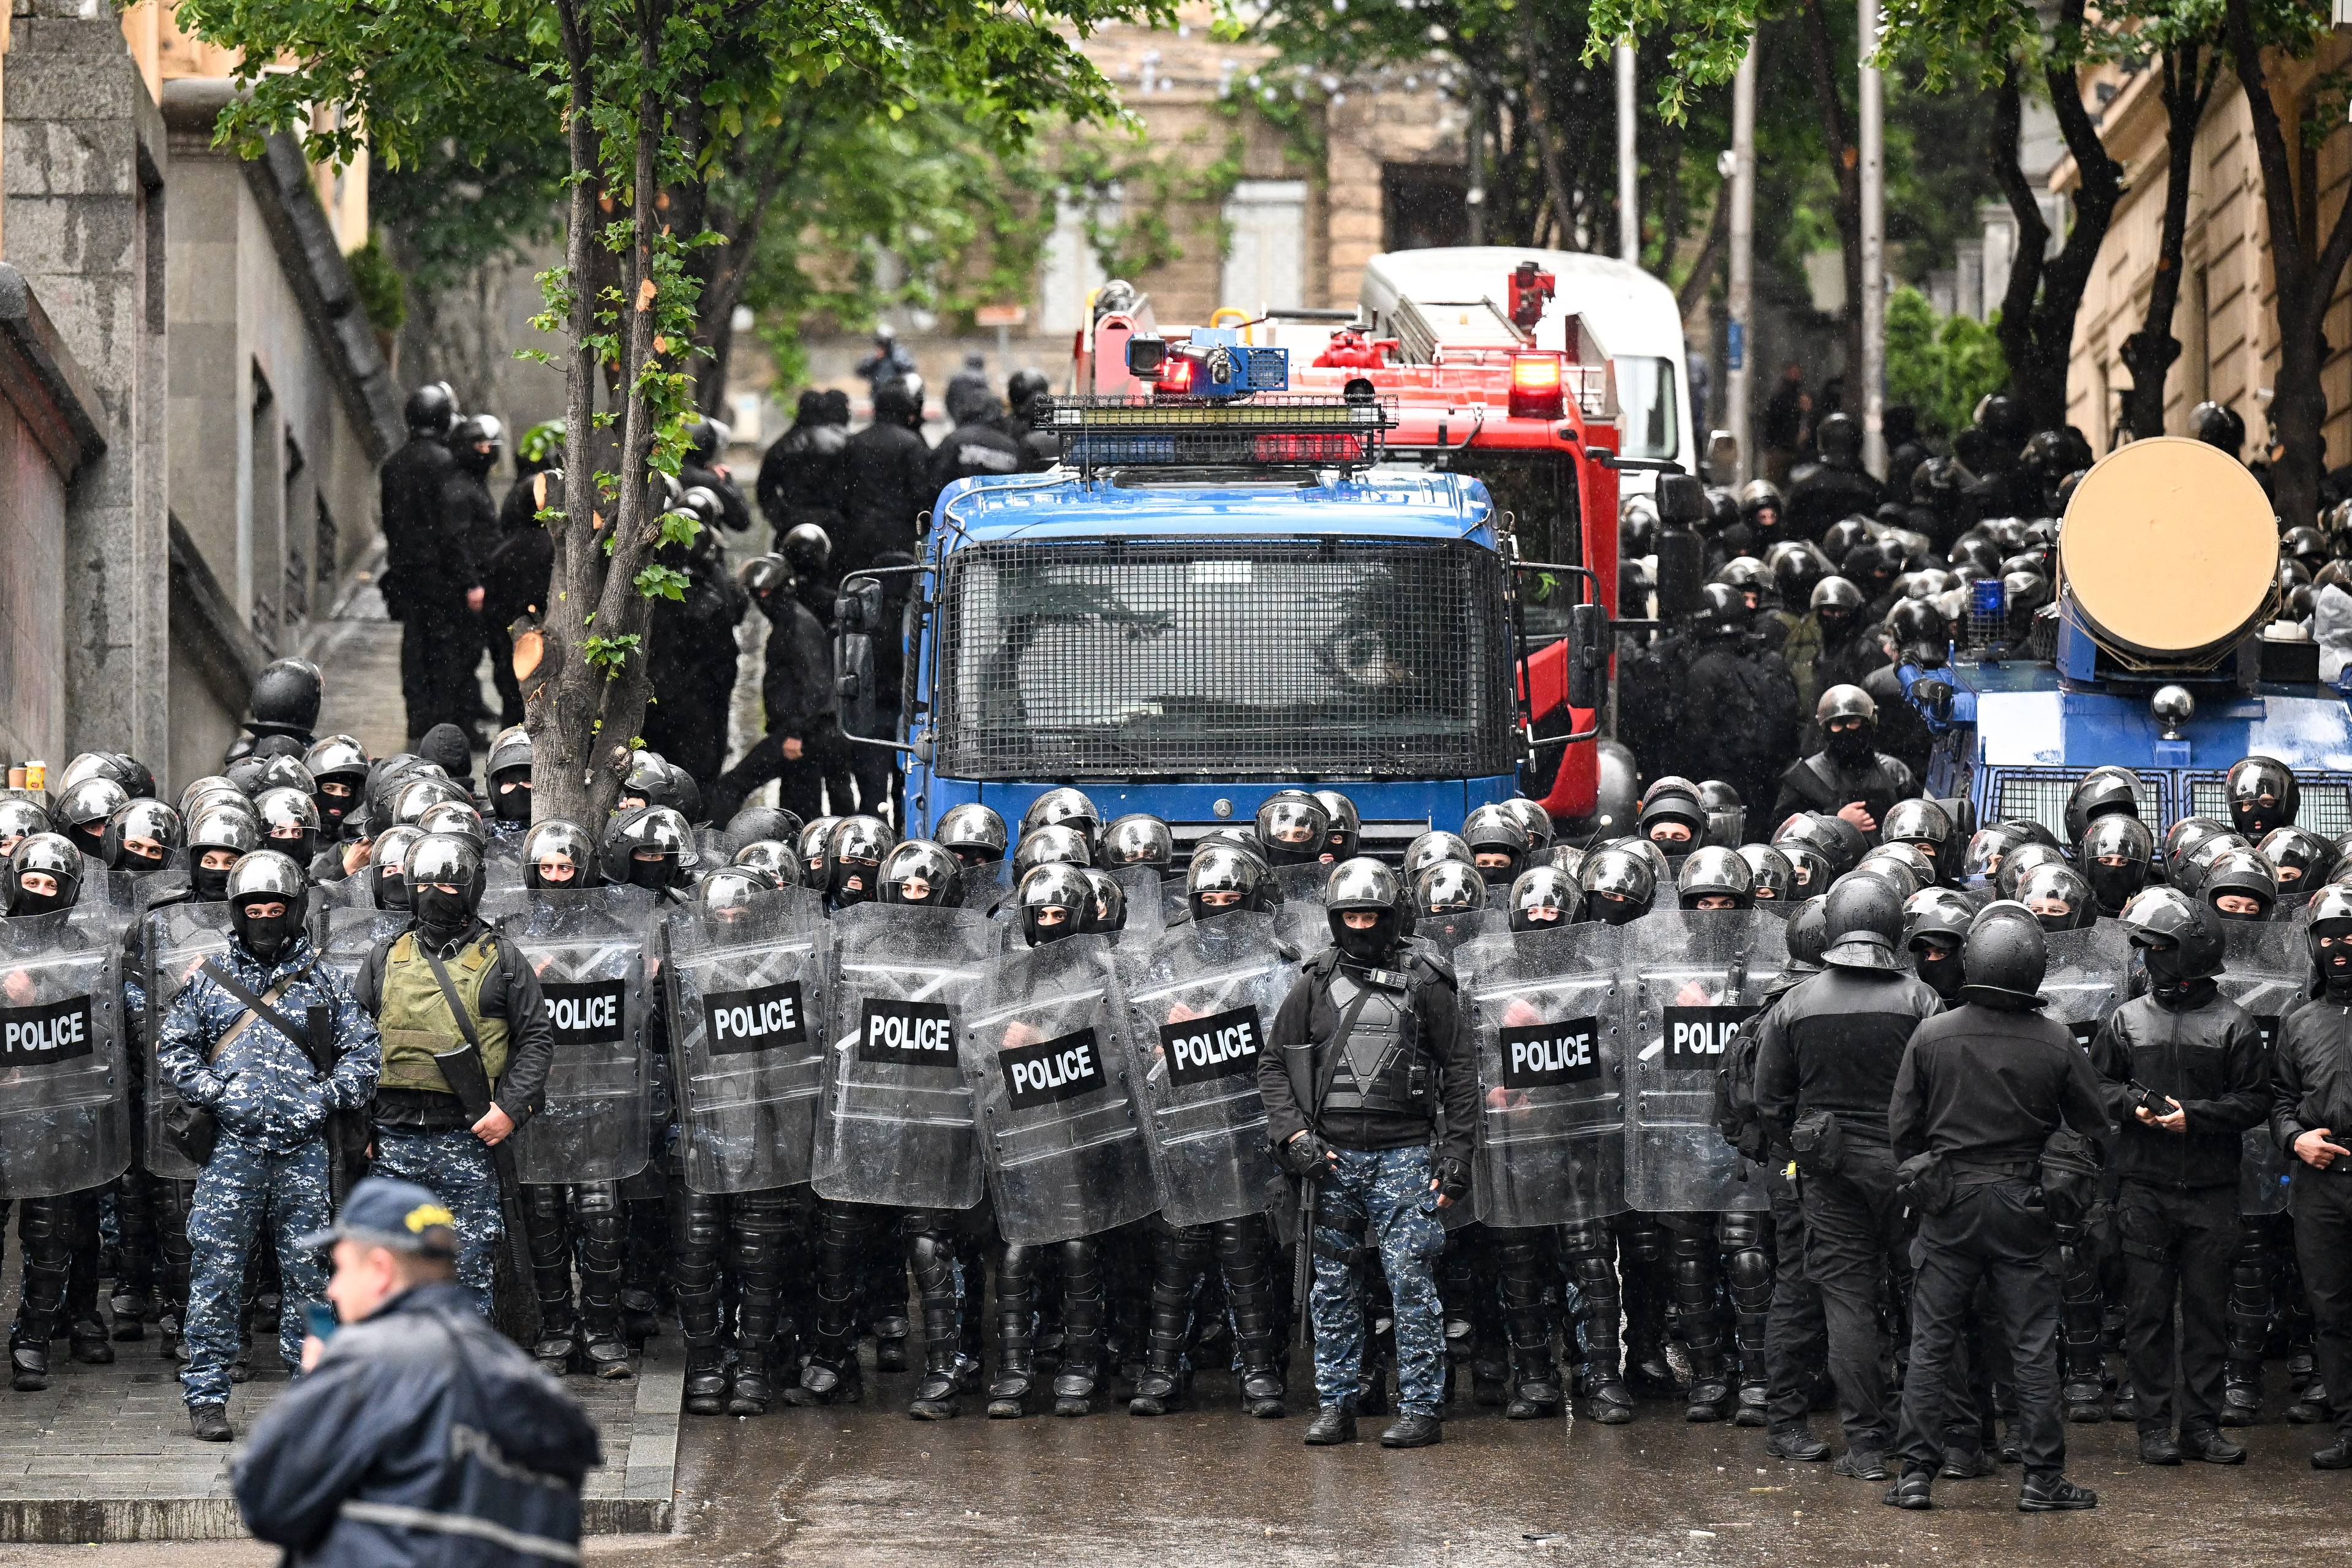 Georgian law enforcement officers are seen deployed on streets as protesters rally against the controversial "foreign influence" bill in Tbilisi on May 14, 2024. - Georgia's parliament on May 14, 2024 adopted a controversial "foreign influence" law that has sparked weeks of mass protests against the measure, denounced as mirroring Russian legislation used to silence dissent. The bill requires non-governmental organisations and media outlets that receive more than 20 percent of their funding from abroad to register as bodies "pursuing the interests of a foreign power." (Photo by Vano SHLAMOV / AFP)